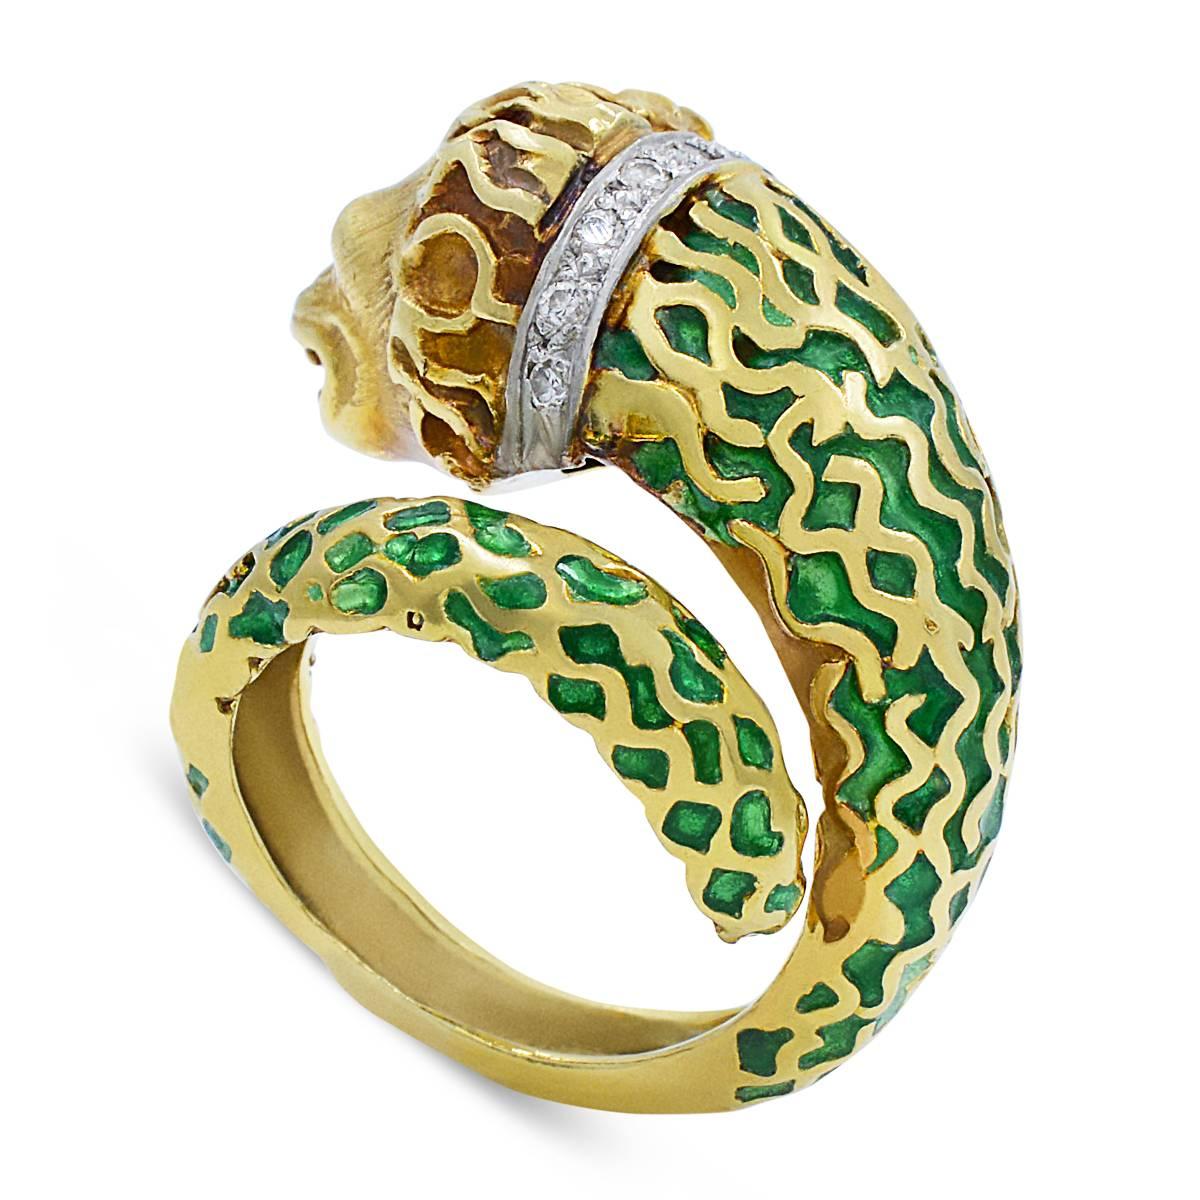 Presented here is an outstanding sculptural by-pass Lion ring in 18K Gold with Green Enamel and Diamonds from the 1960s. 

The quality and workmanship is very detailed and he is an exceptionally handsome lion. The face, so very fine, you can see the